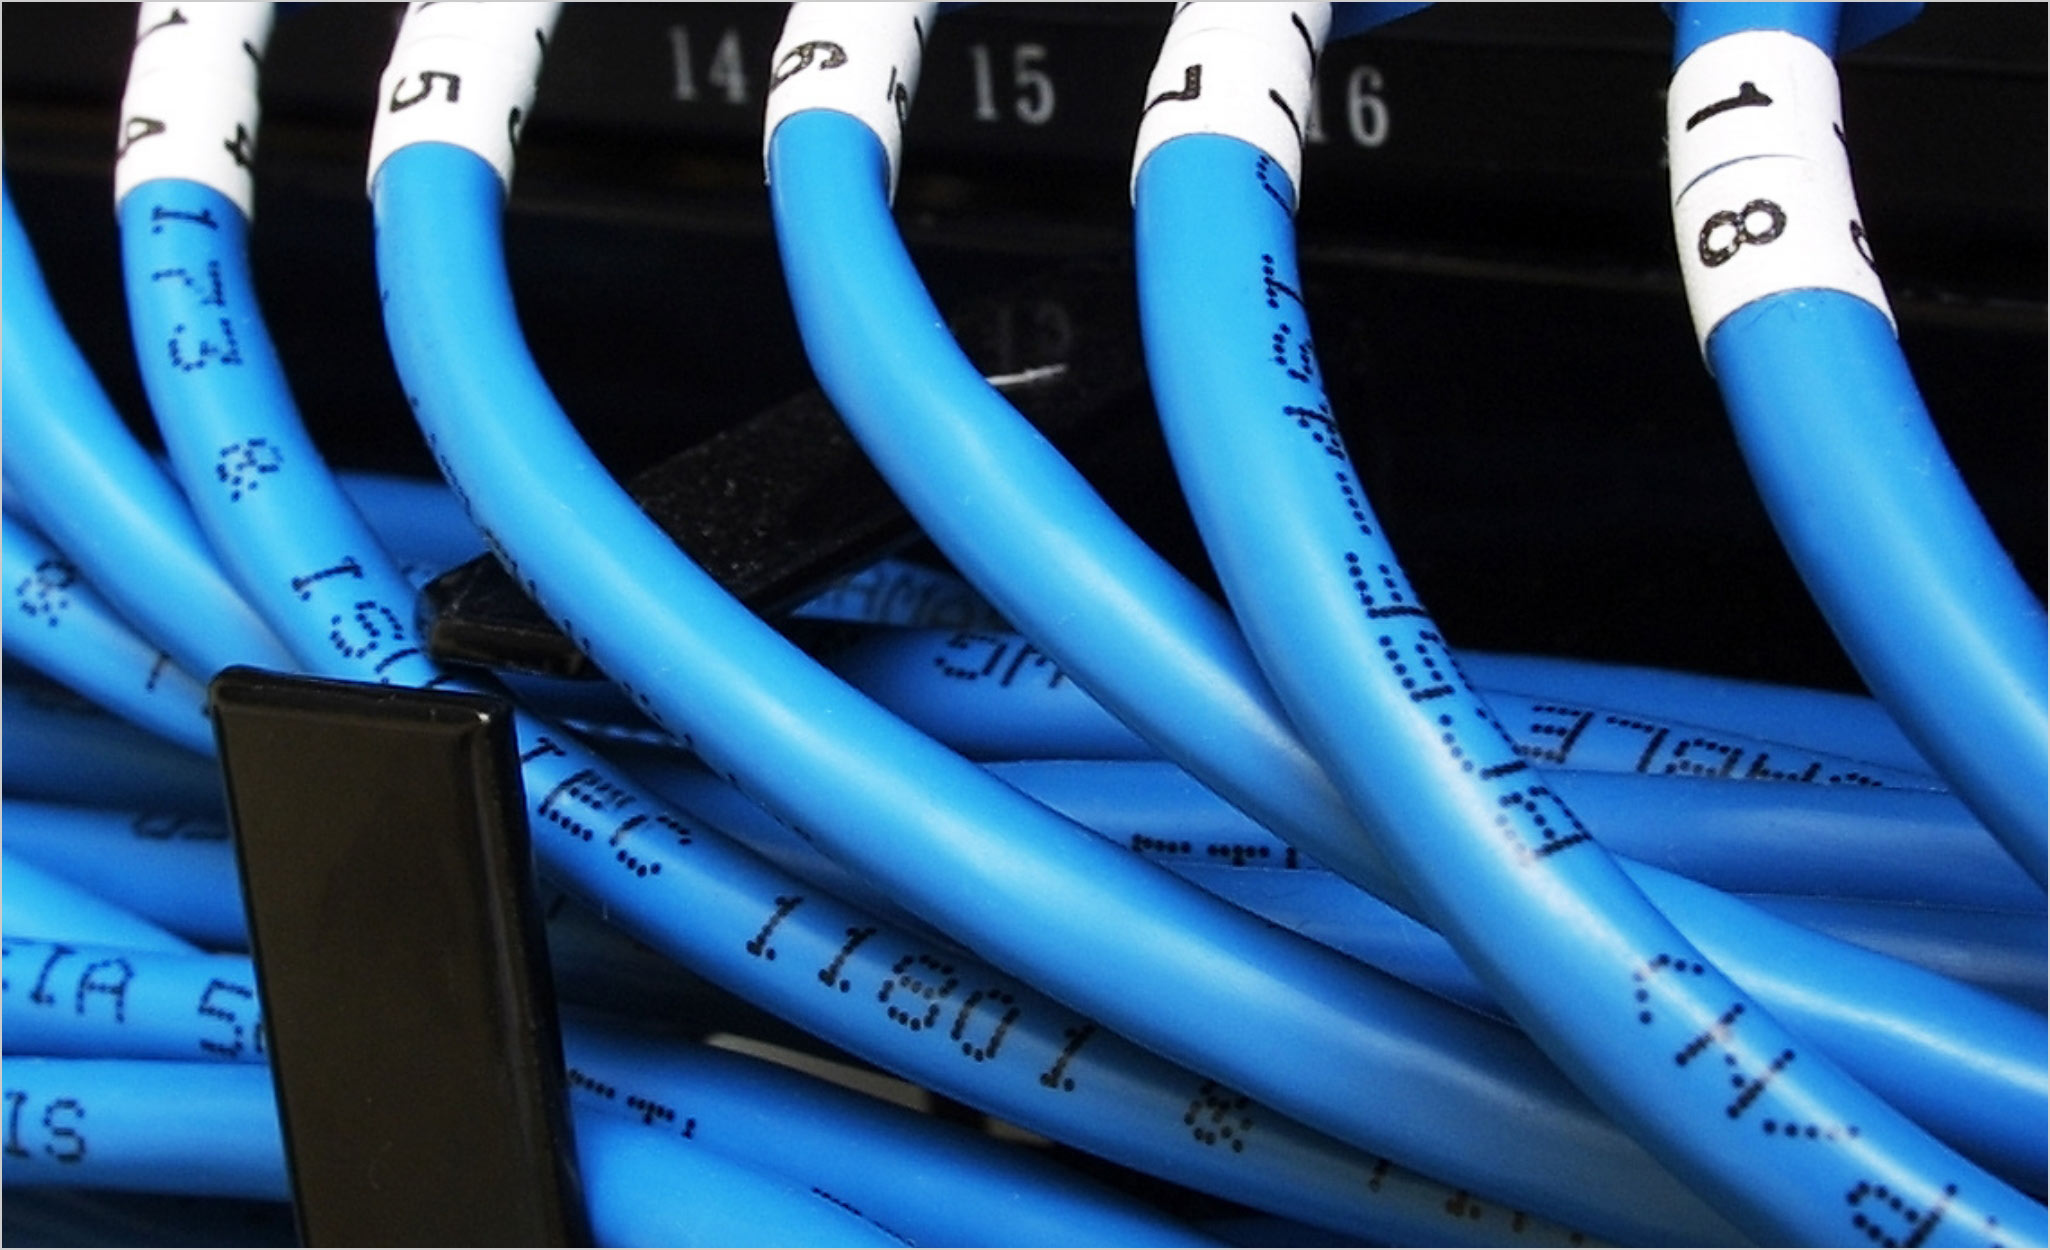 Blue wires feature identifying labels.